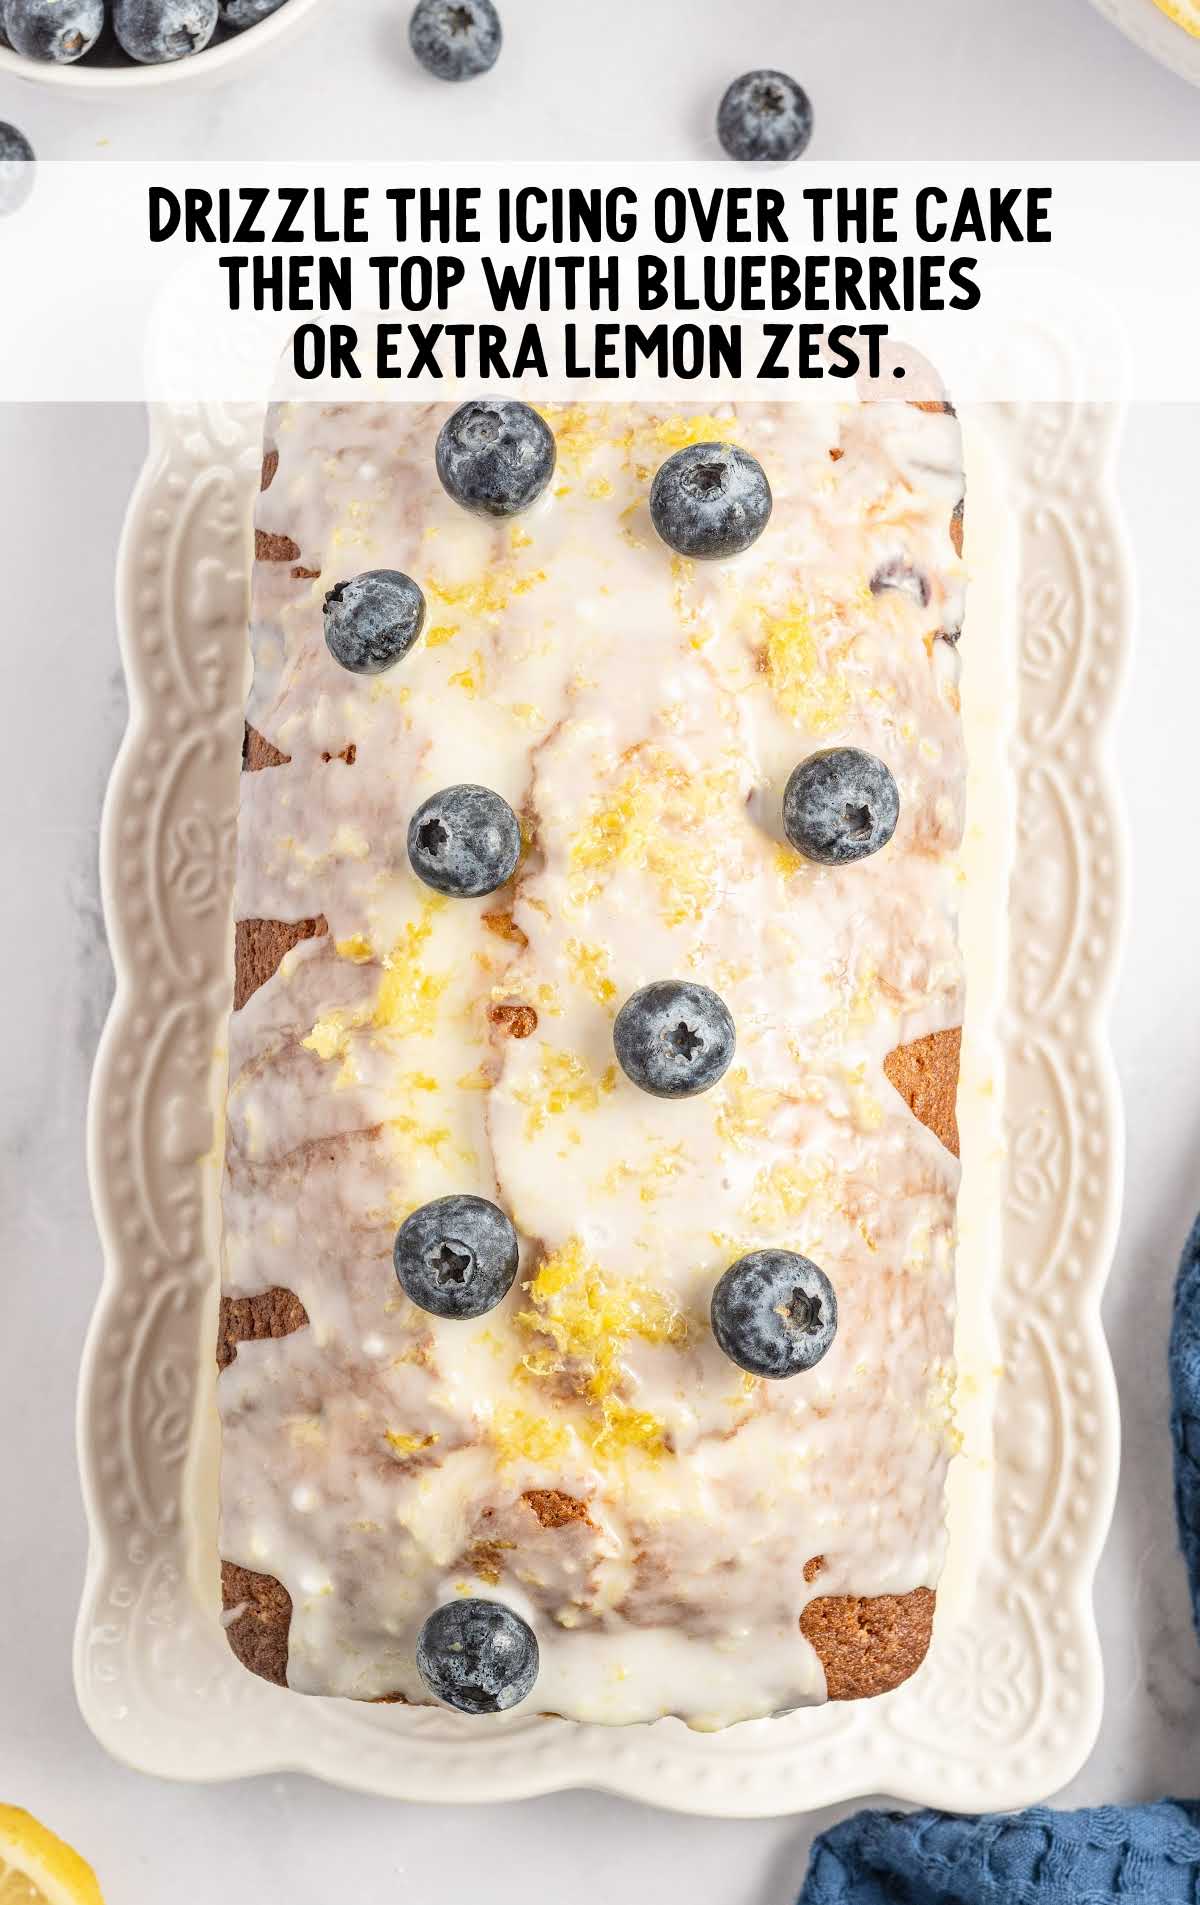 pound cake topped with glaze, blueberries, and lemon zest